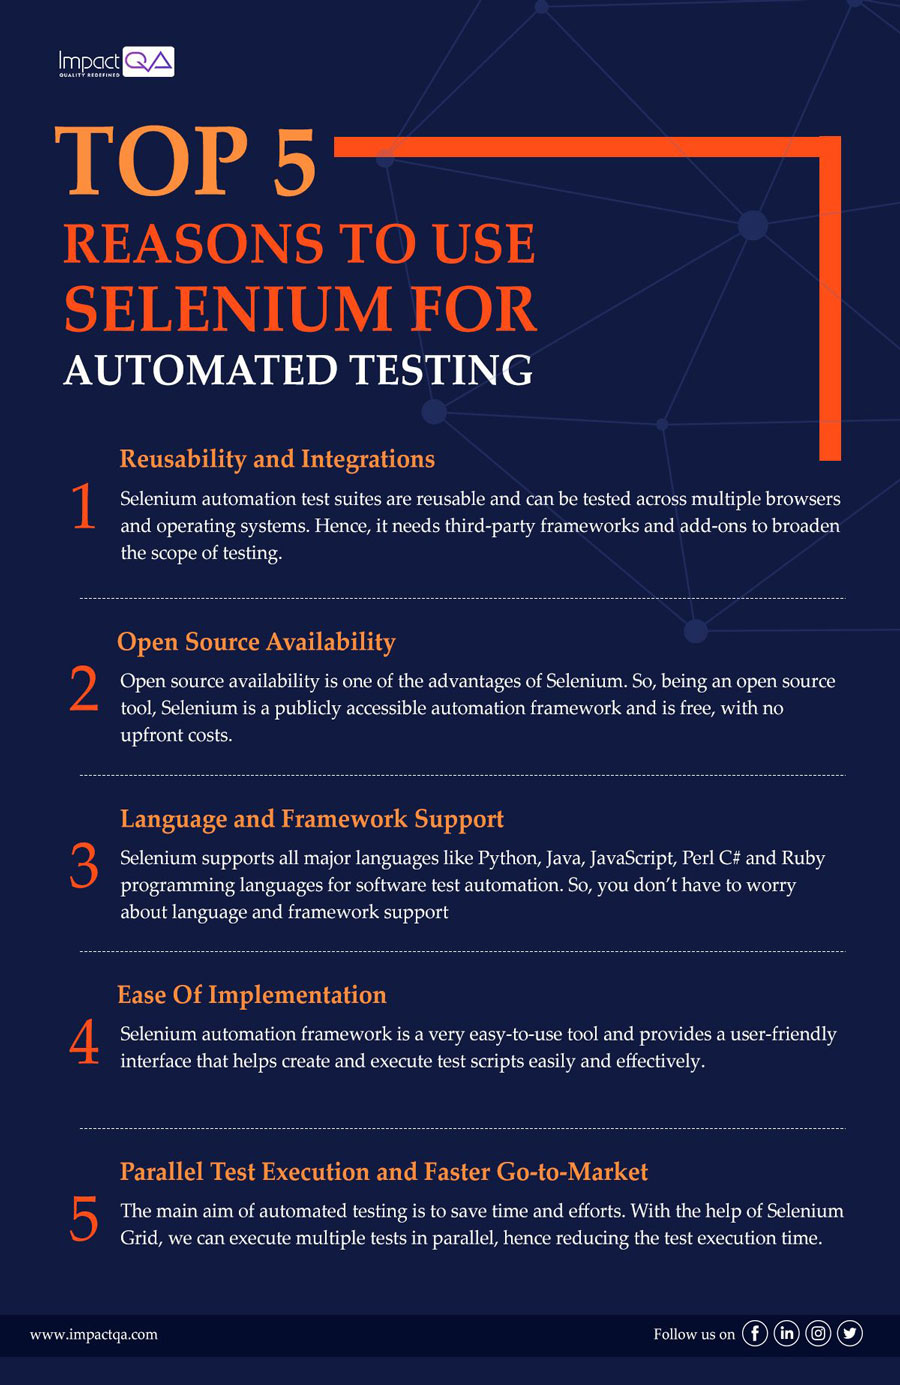 Reasons to use selenium for automated testing